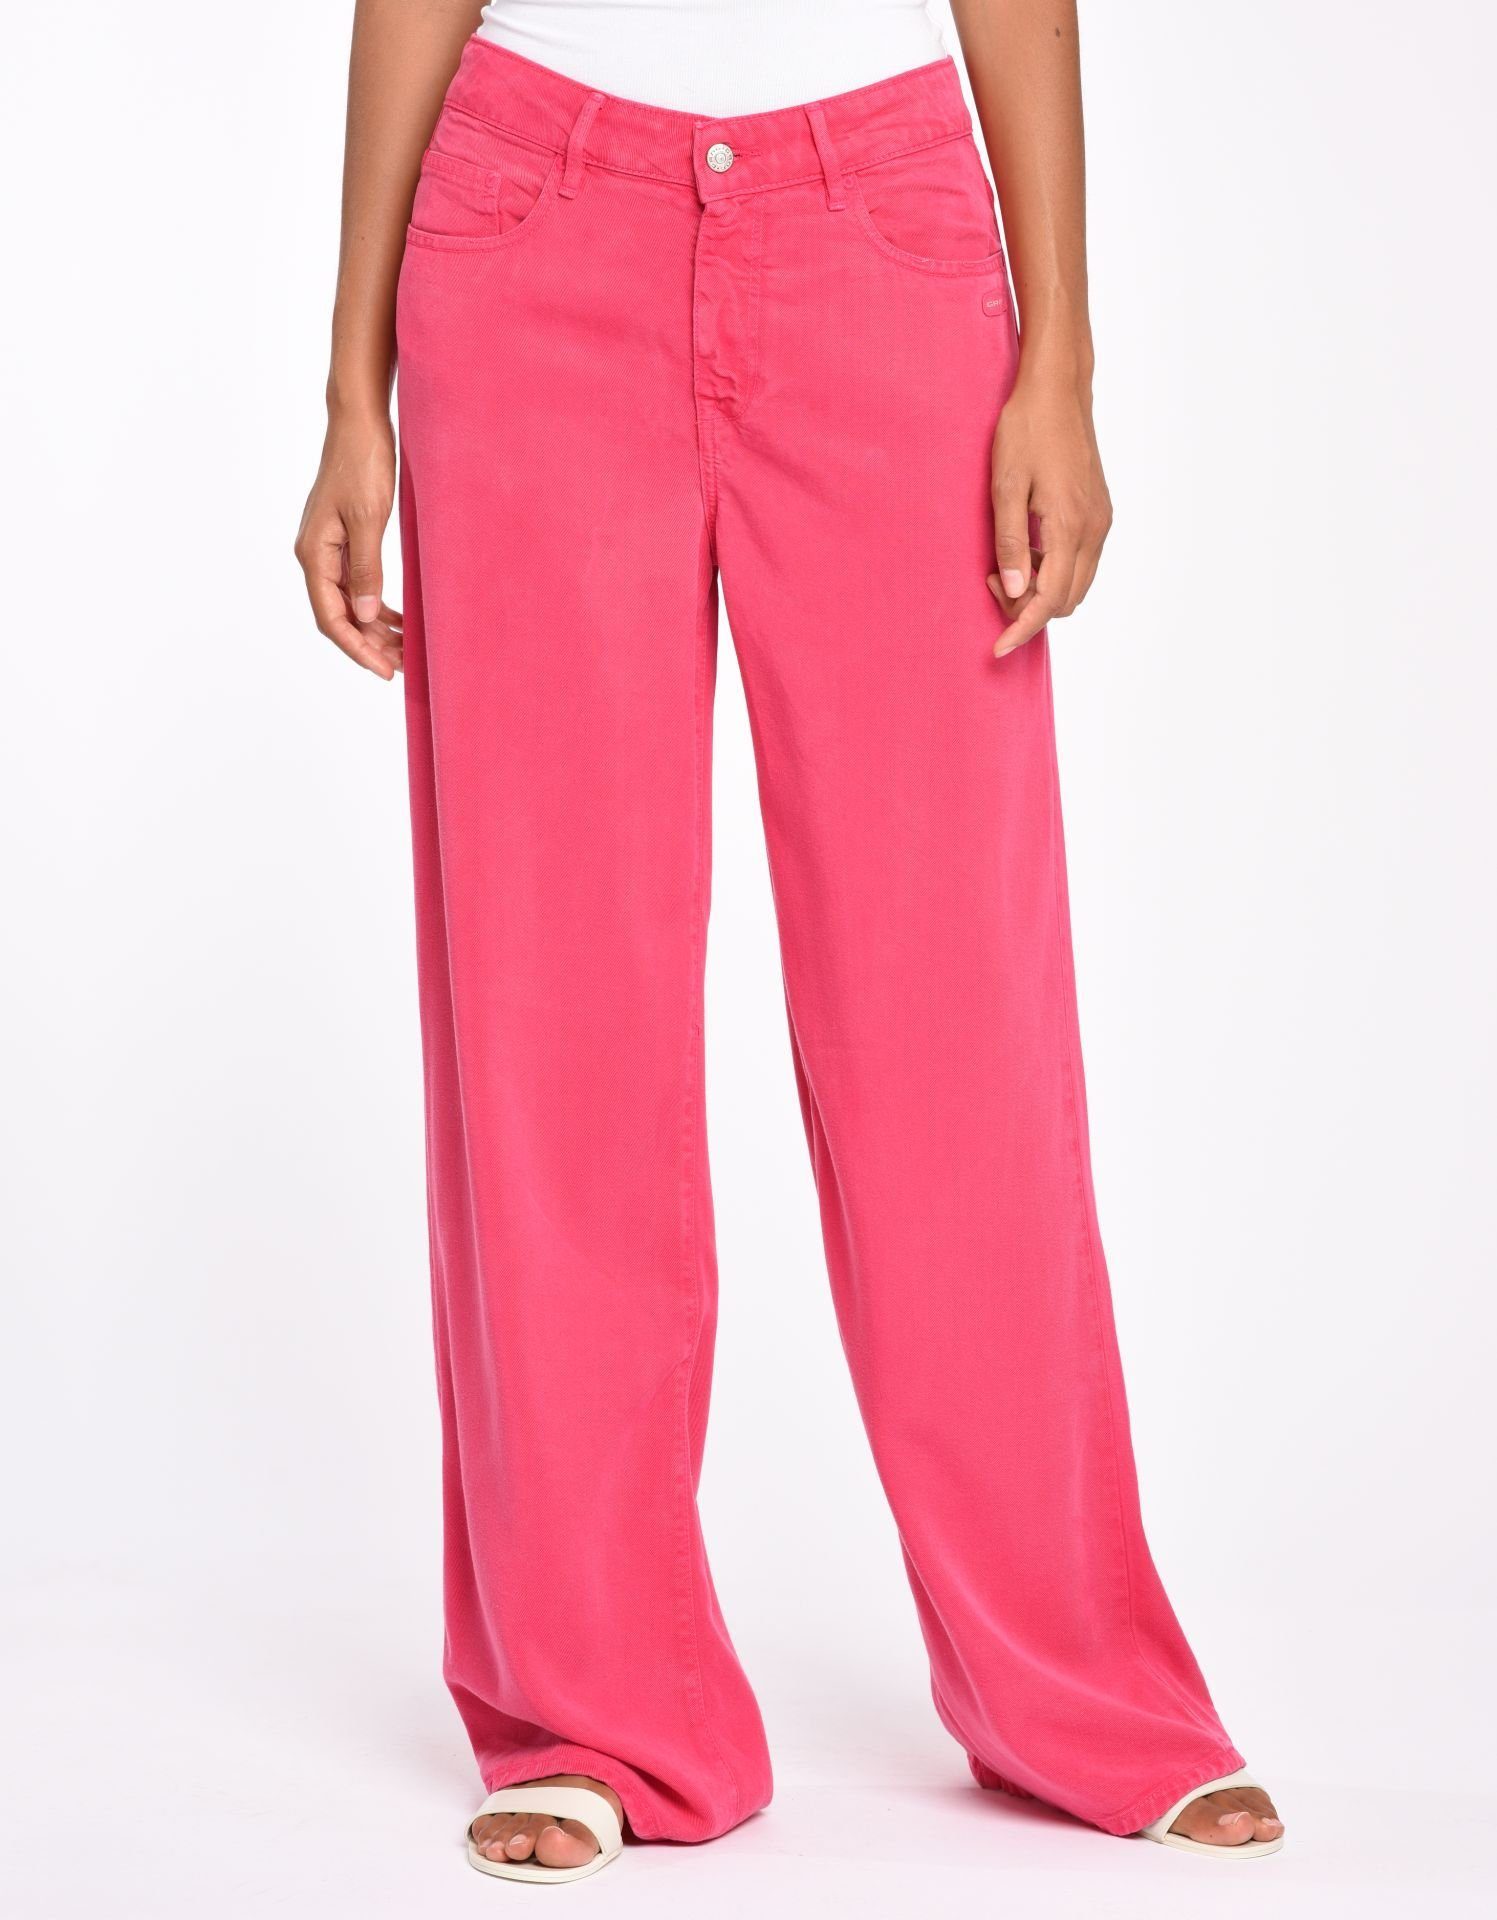 GANG Weite fuxia Jeans pink 6359